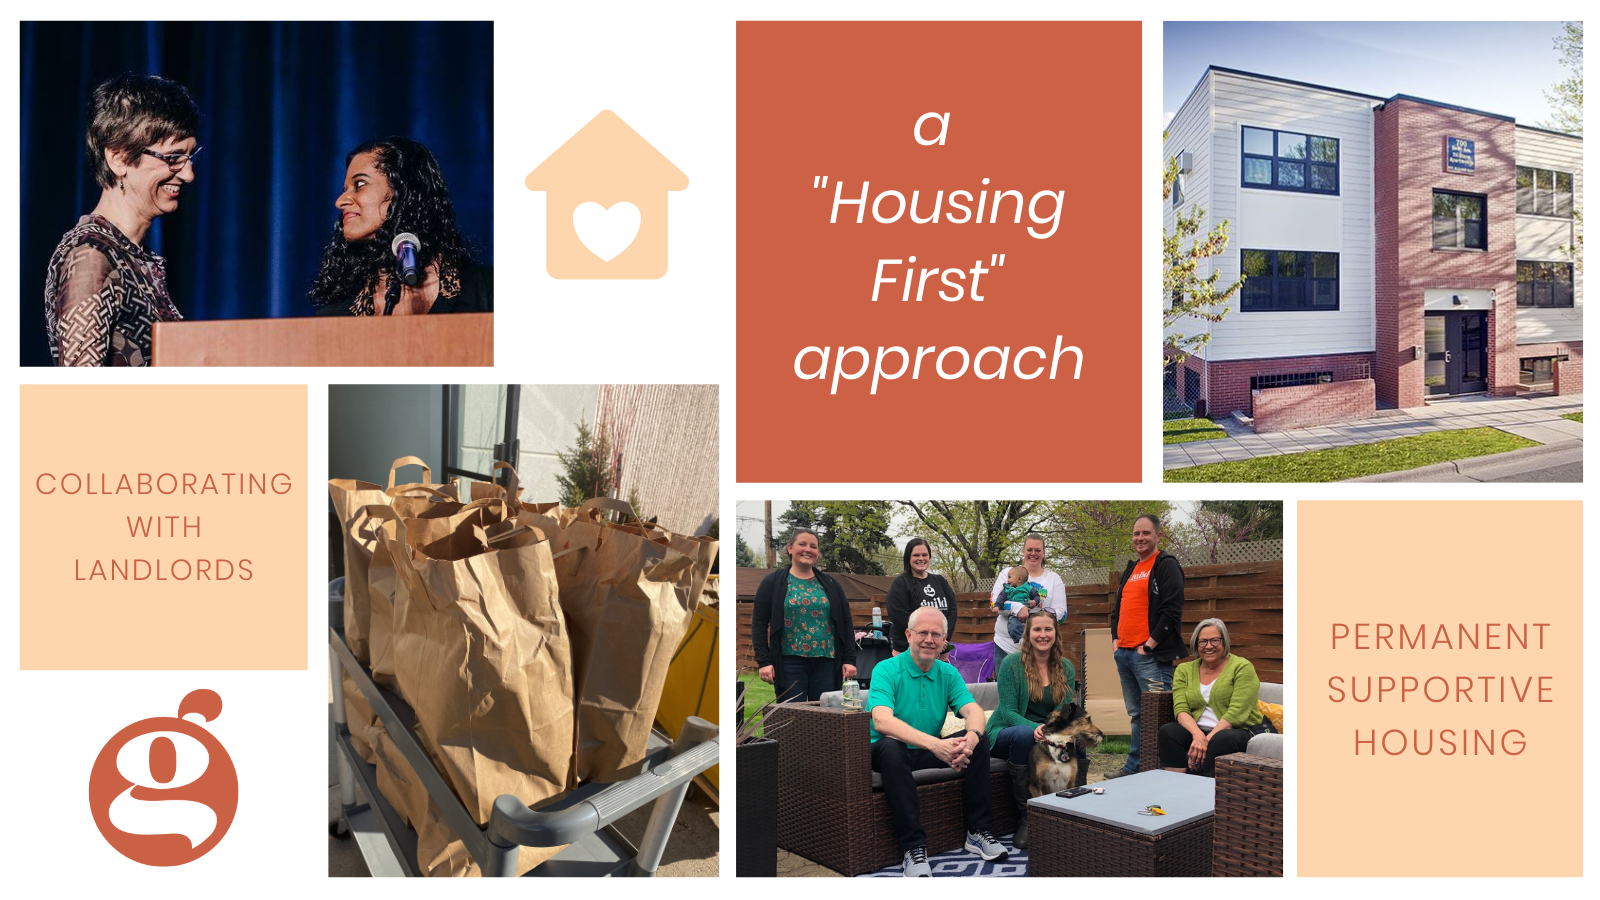 Collage with photos of staff, Guild facilities, and the phrases "a Housing First approach," "permanent supportive housing," and "collaborating with landlords"